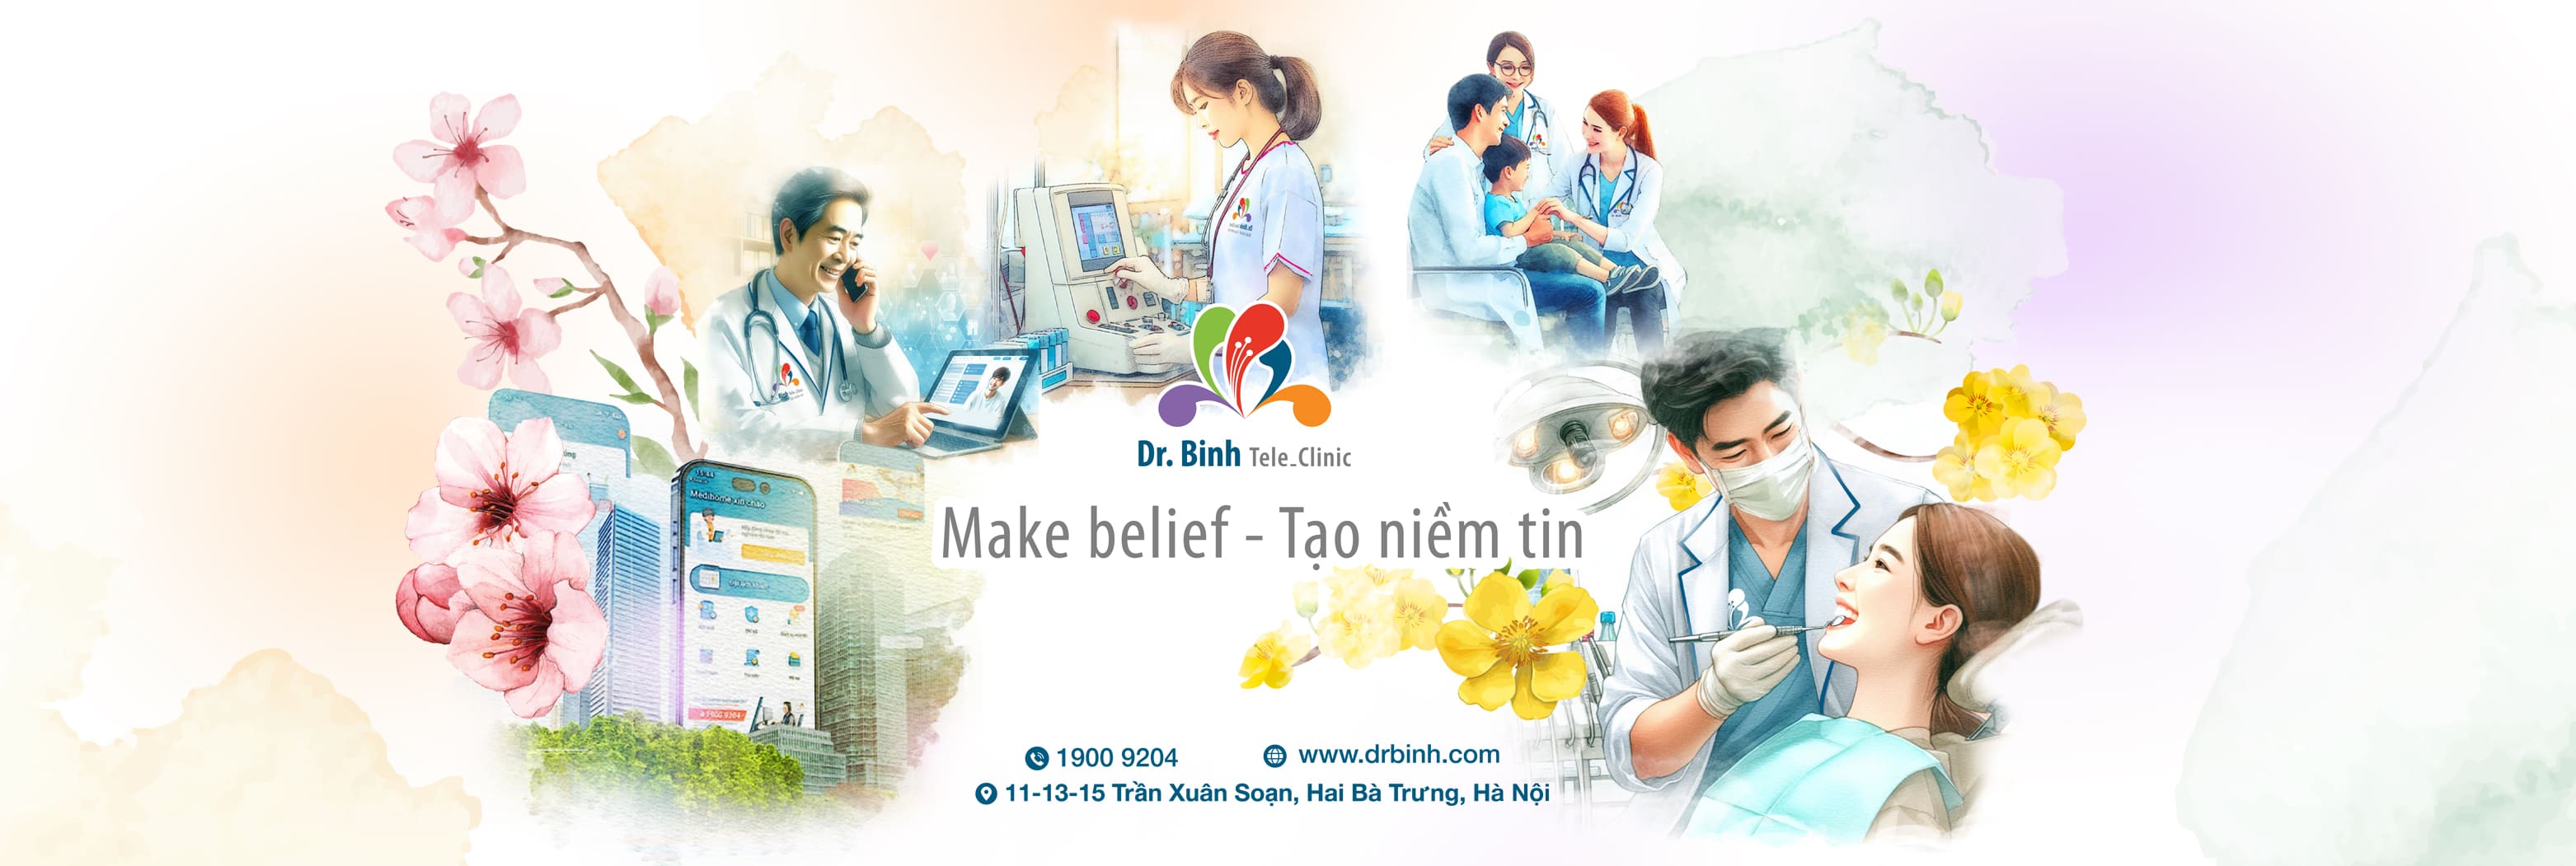 About Dr.Binh Tele_Clinic